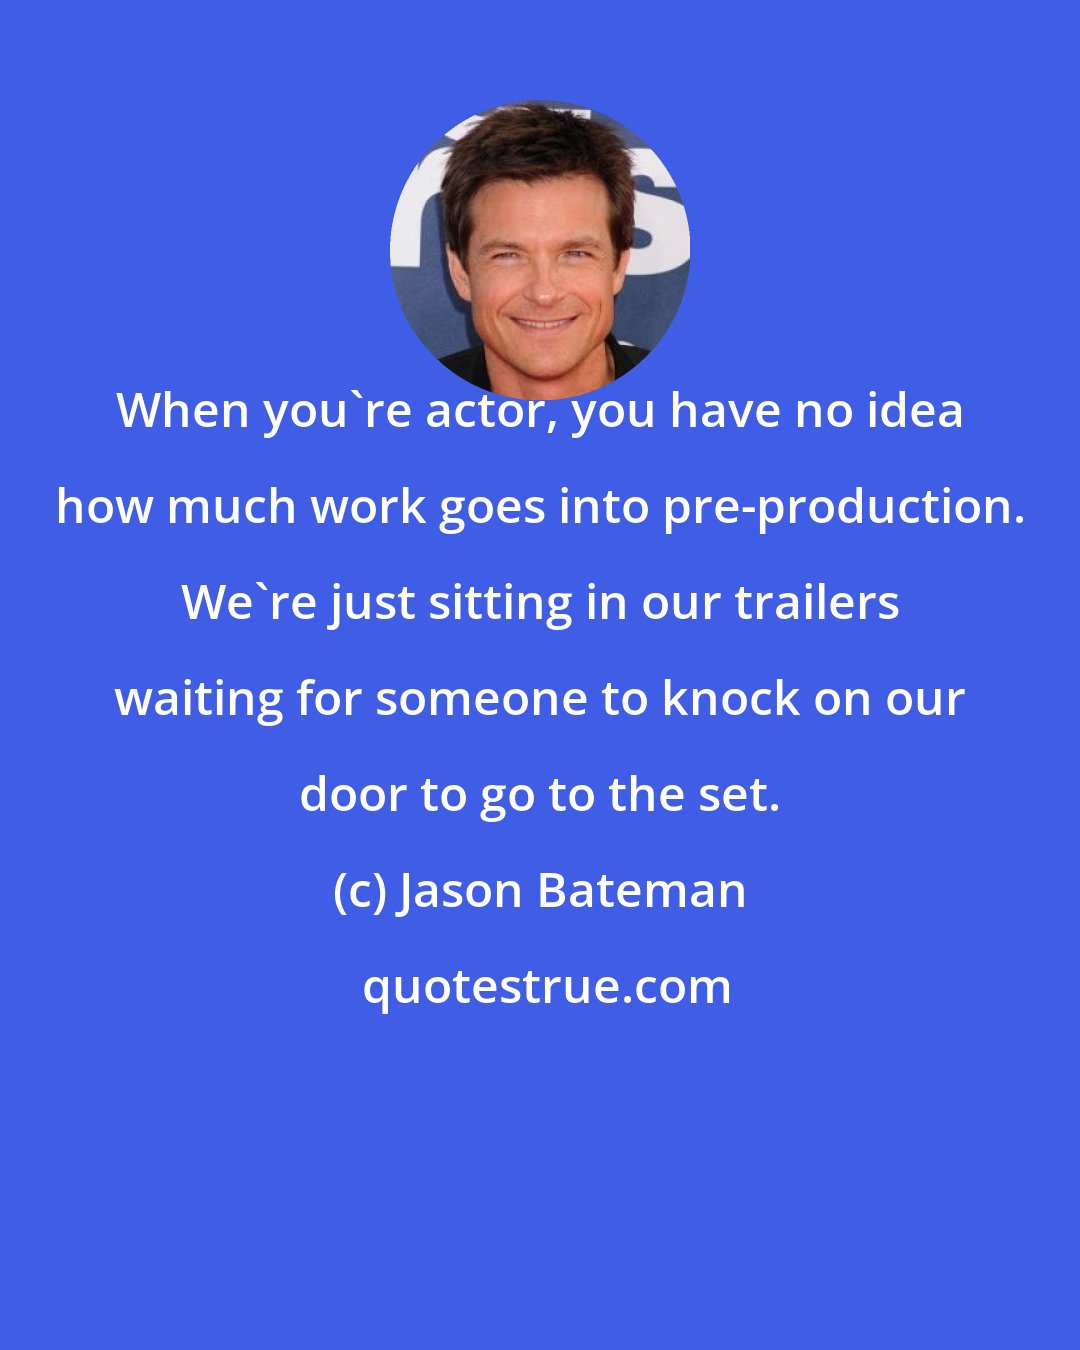 Jason Bateman: When you're actor, you have no idea how much work goes into pre-production. We're just sitting in our trailers waiting for someone to knock on our door to go to the set.